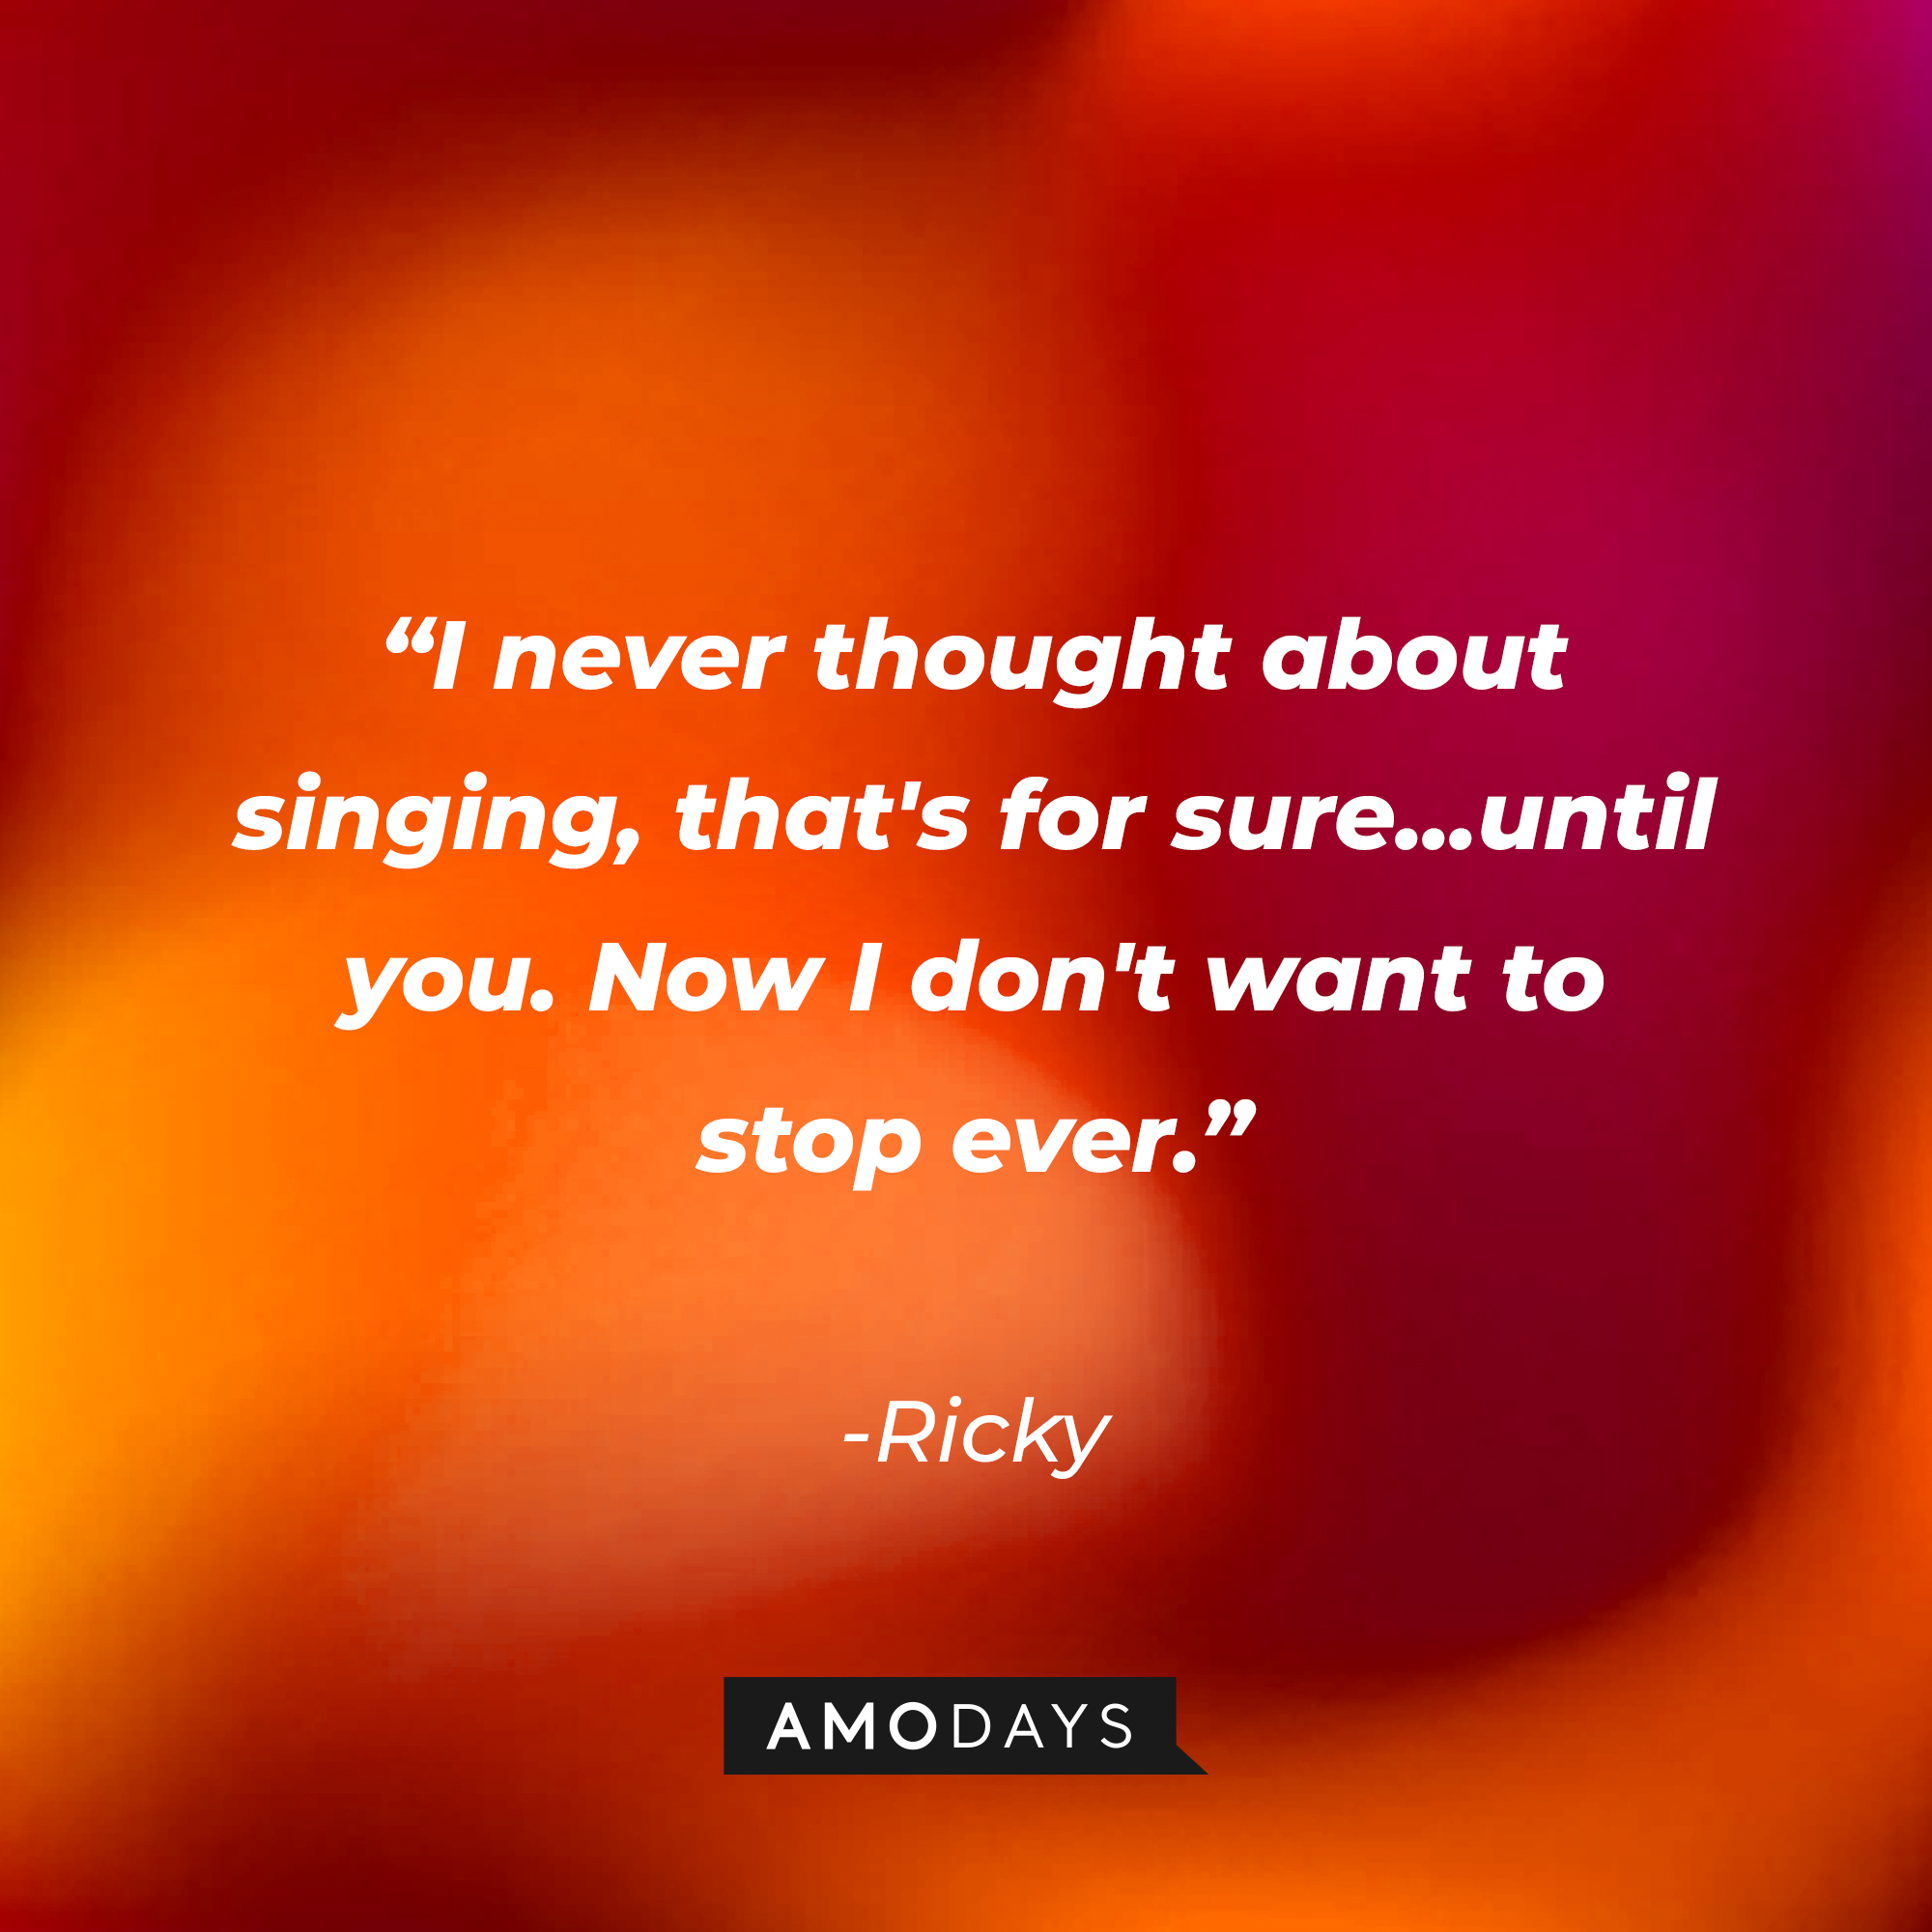 Ricky’s quote: "I never thought about singing, that's for sure... until you. Now I don't want to stop ever." | Source: AmoDays